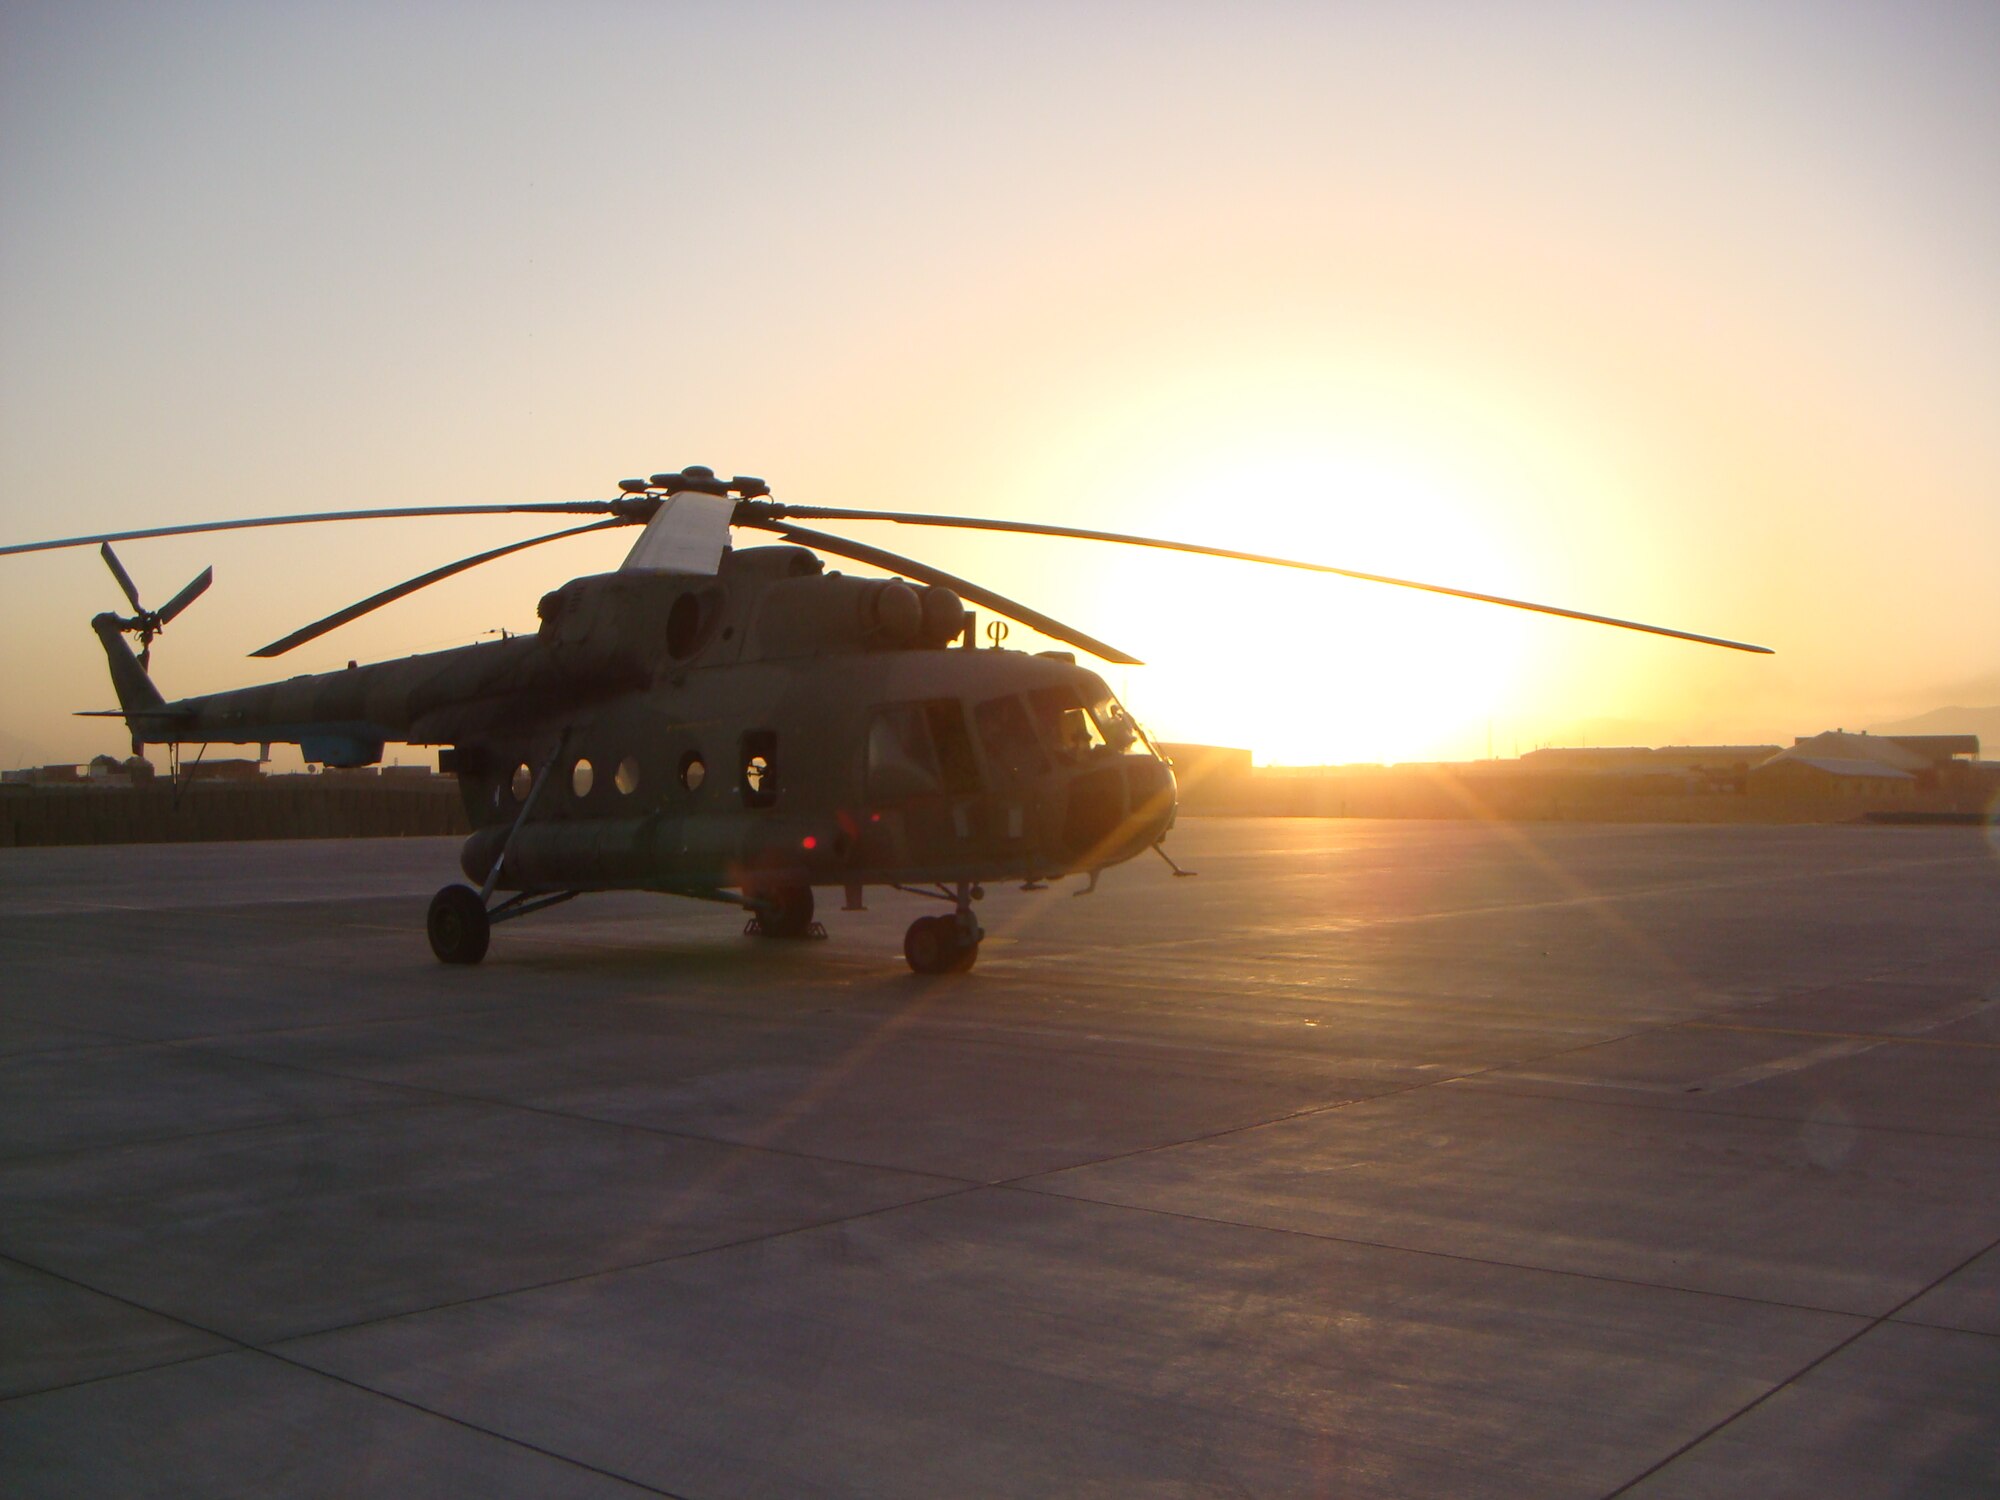 Matthew, Northrup-Grumman chief pilot, prepares to take off in his Russian Mi-17 helicopter in Afghanistan in 2011. During this point in his career, Matthew also served in the U.S. Army Reserves while taking seminary classes online which would lead to his current assignment as a U.S. Air Force chaplain at Creech Air Force Base, Nev. (courtesy photo)